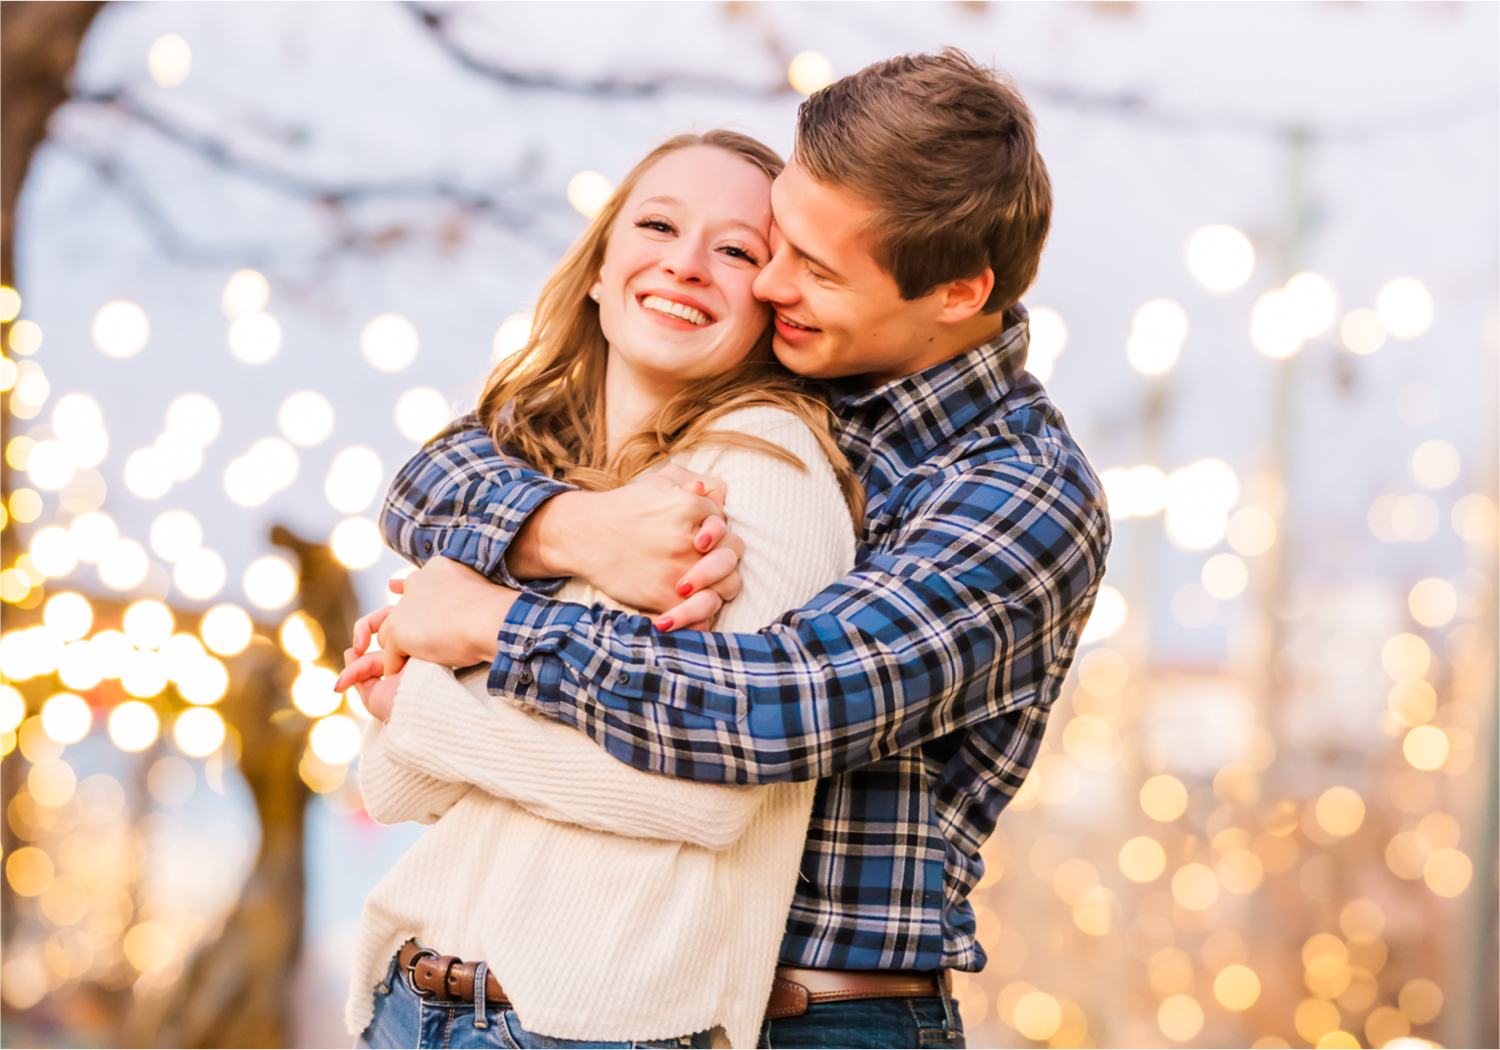 Winter Engagement in Old Town Fort Collins | Colorado Wedding Photographer and Videographer | Britni Girard Photography | Wedding and Engagement Films | Dancing, twinkle lights and Christmas in Old Town Square